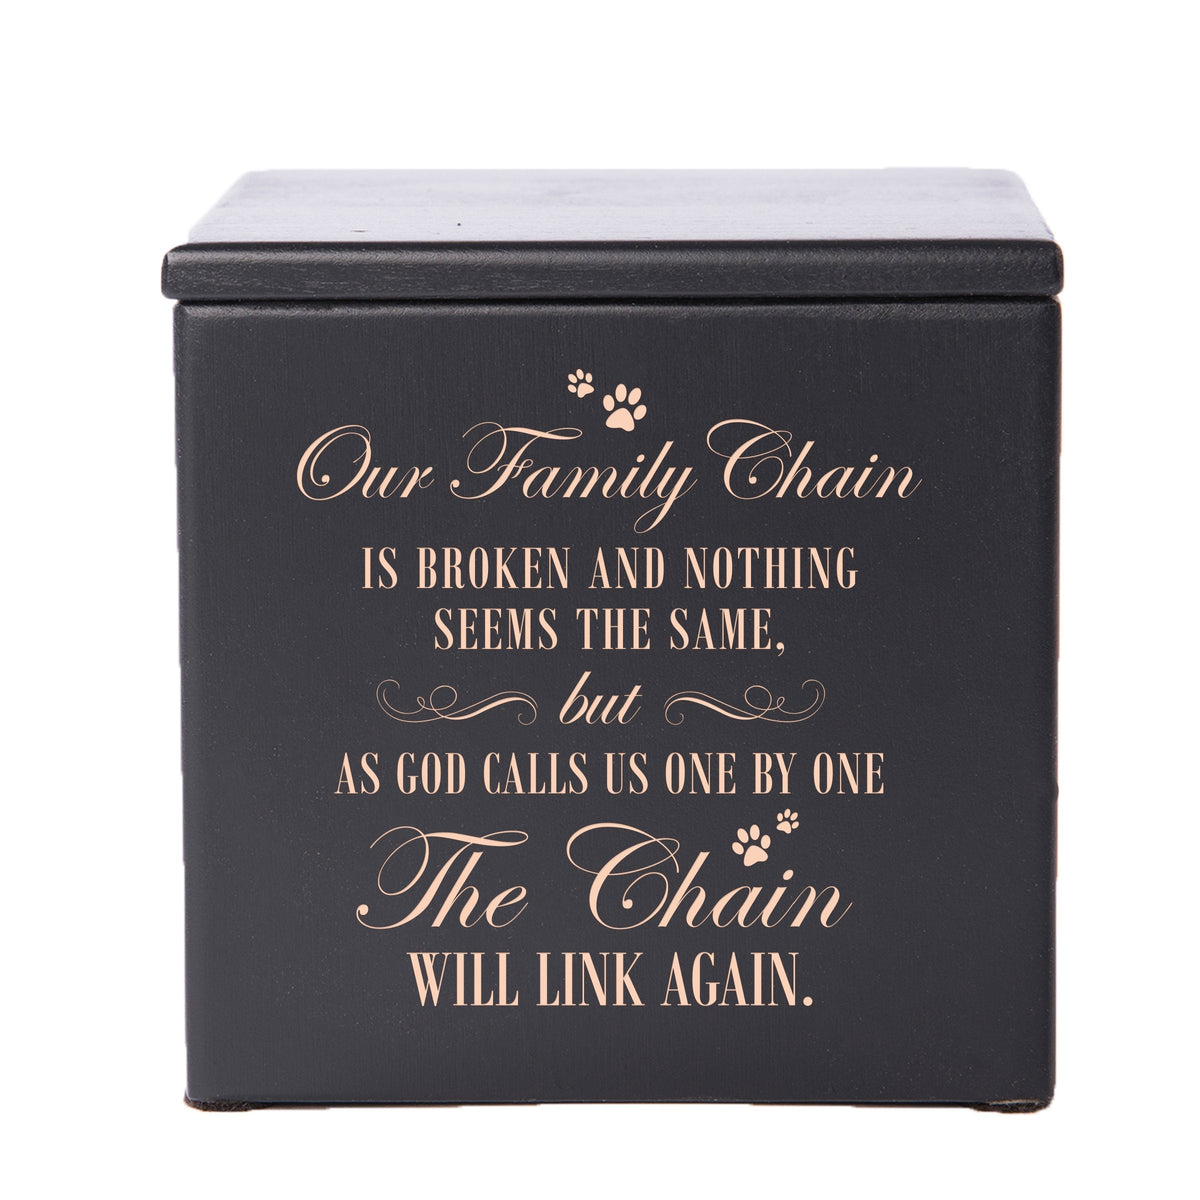 Black Pet Memorial 3.5x3.5 Keepsake Urn with phrase &quot;Our Family Chain&quot;